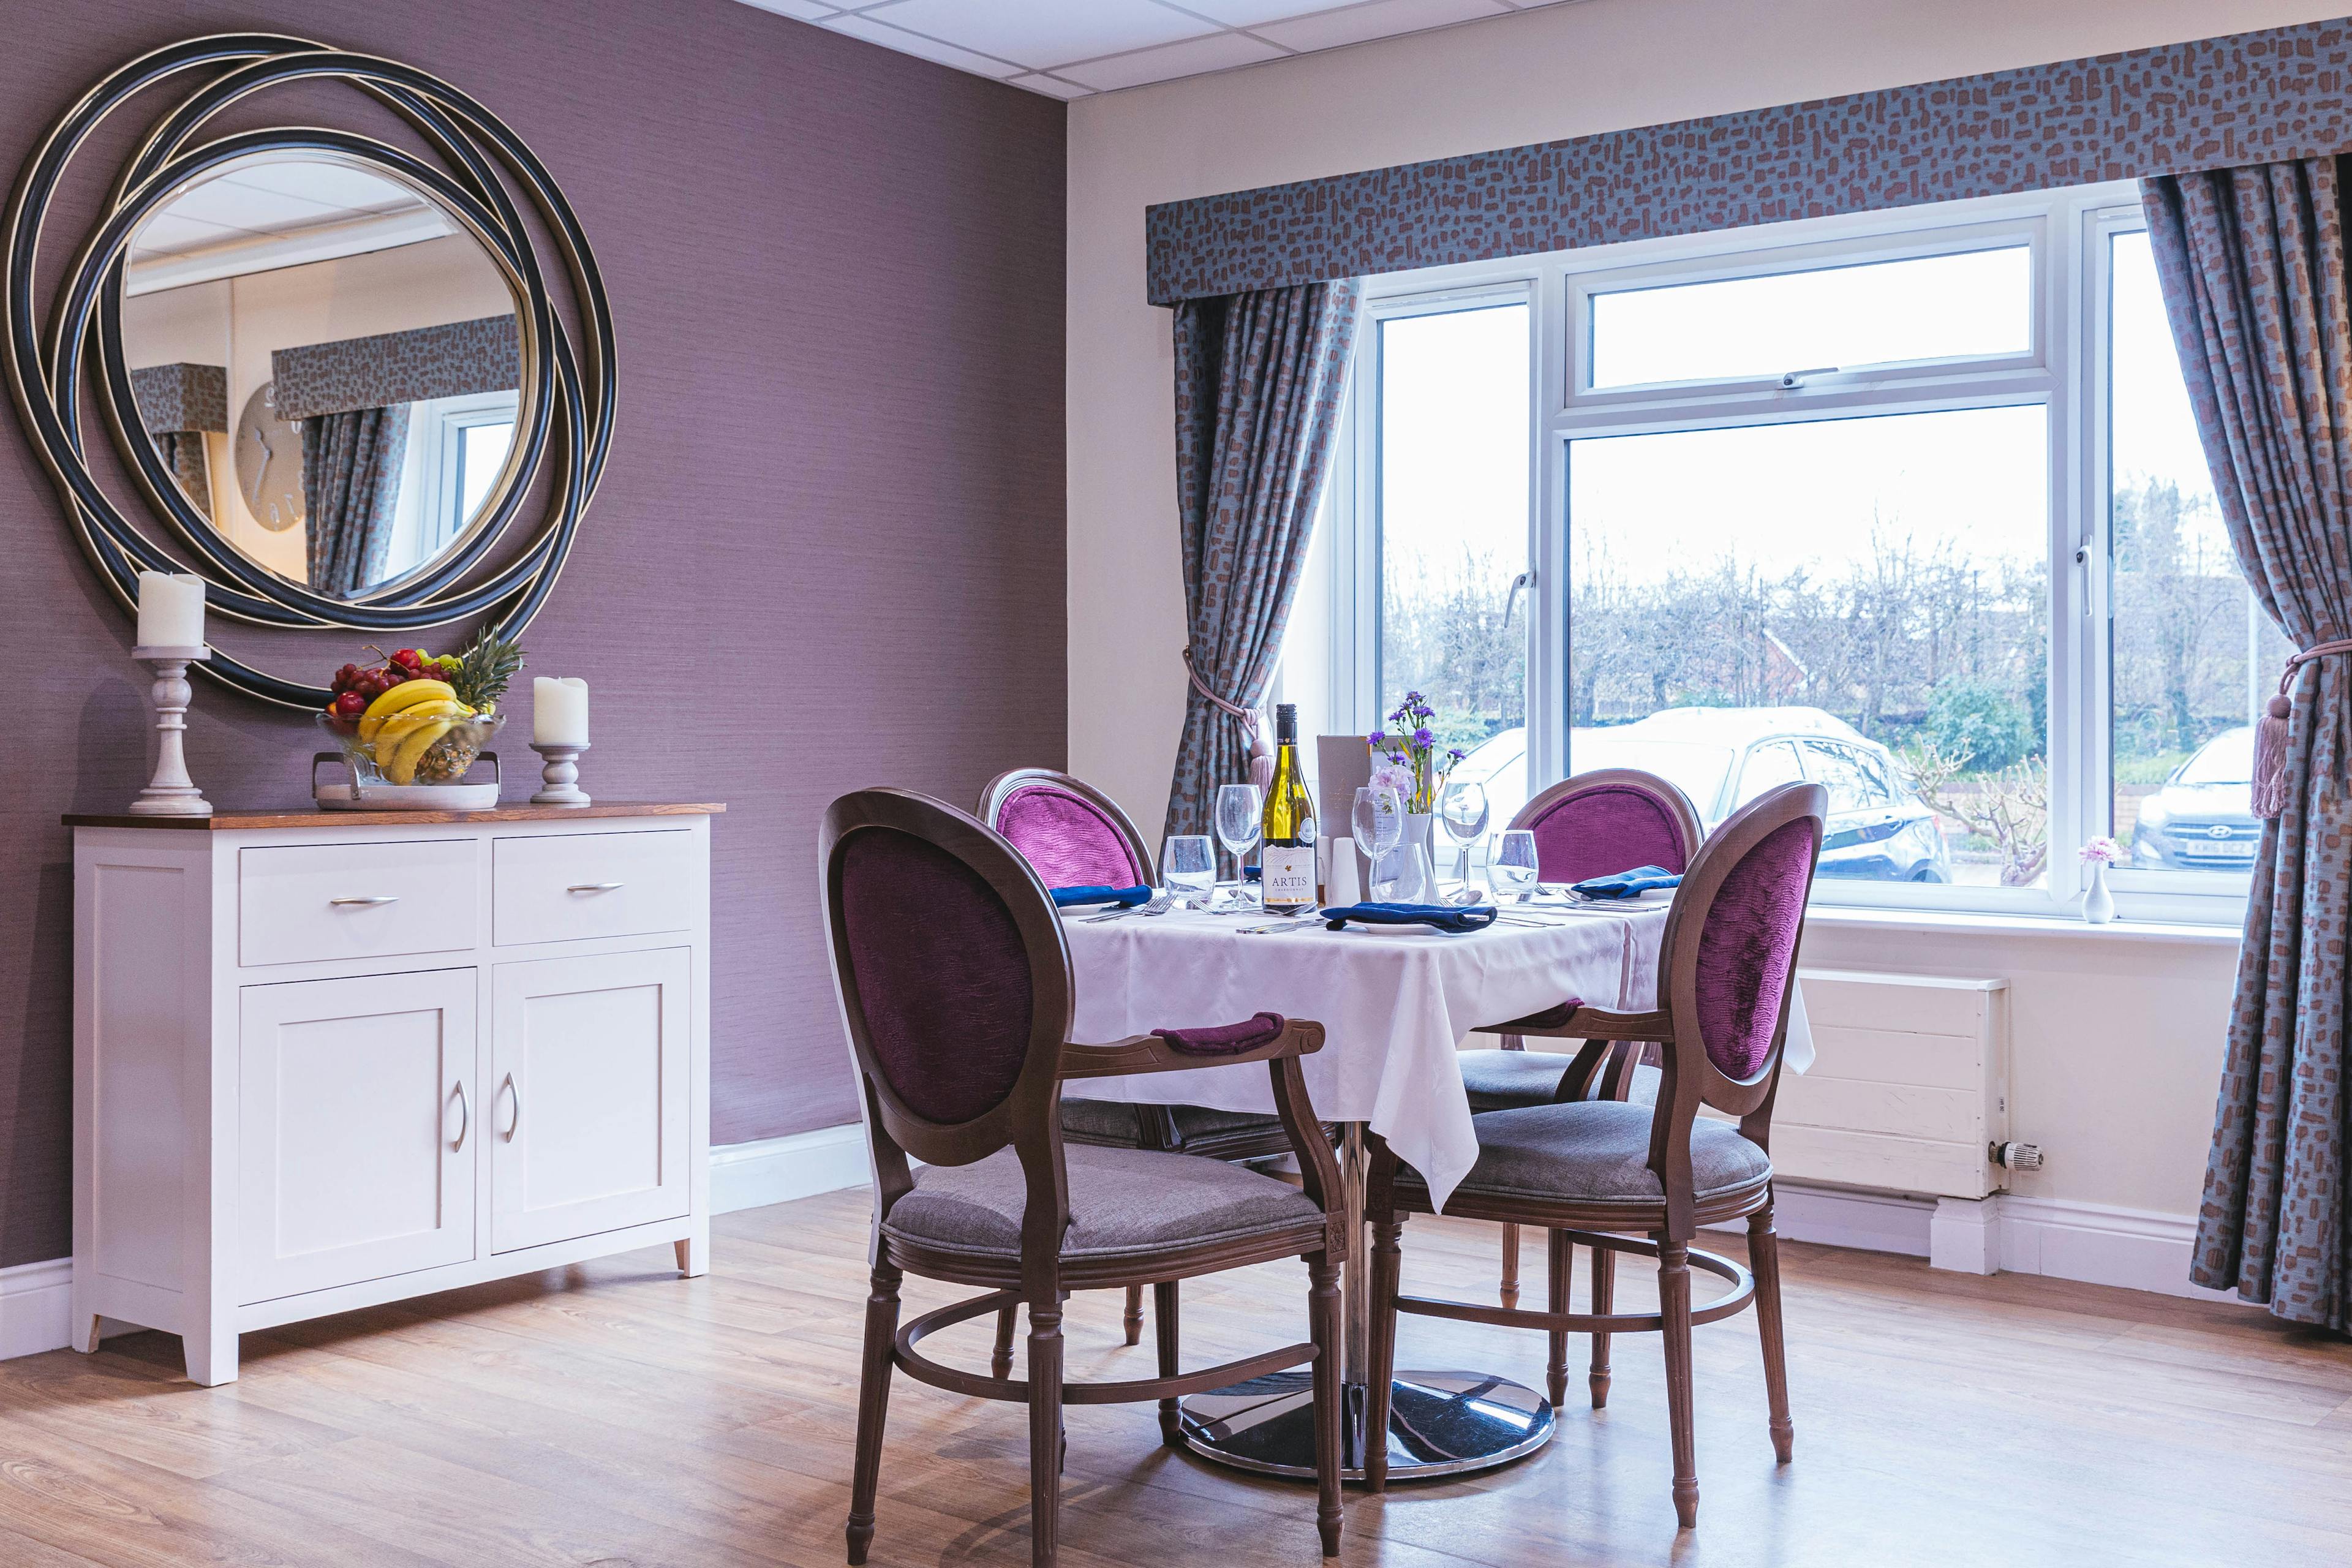 Dining Room at Rose Lodge Care Home in Wisbech, Cambridgeshire